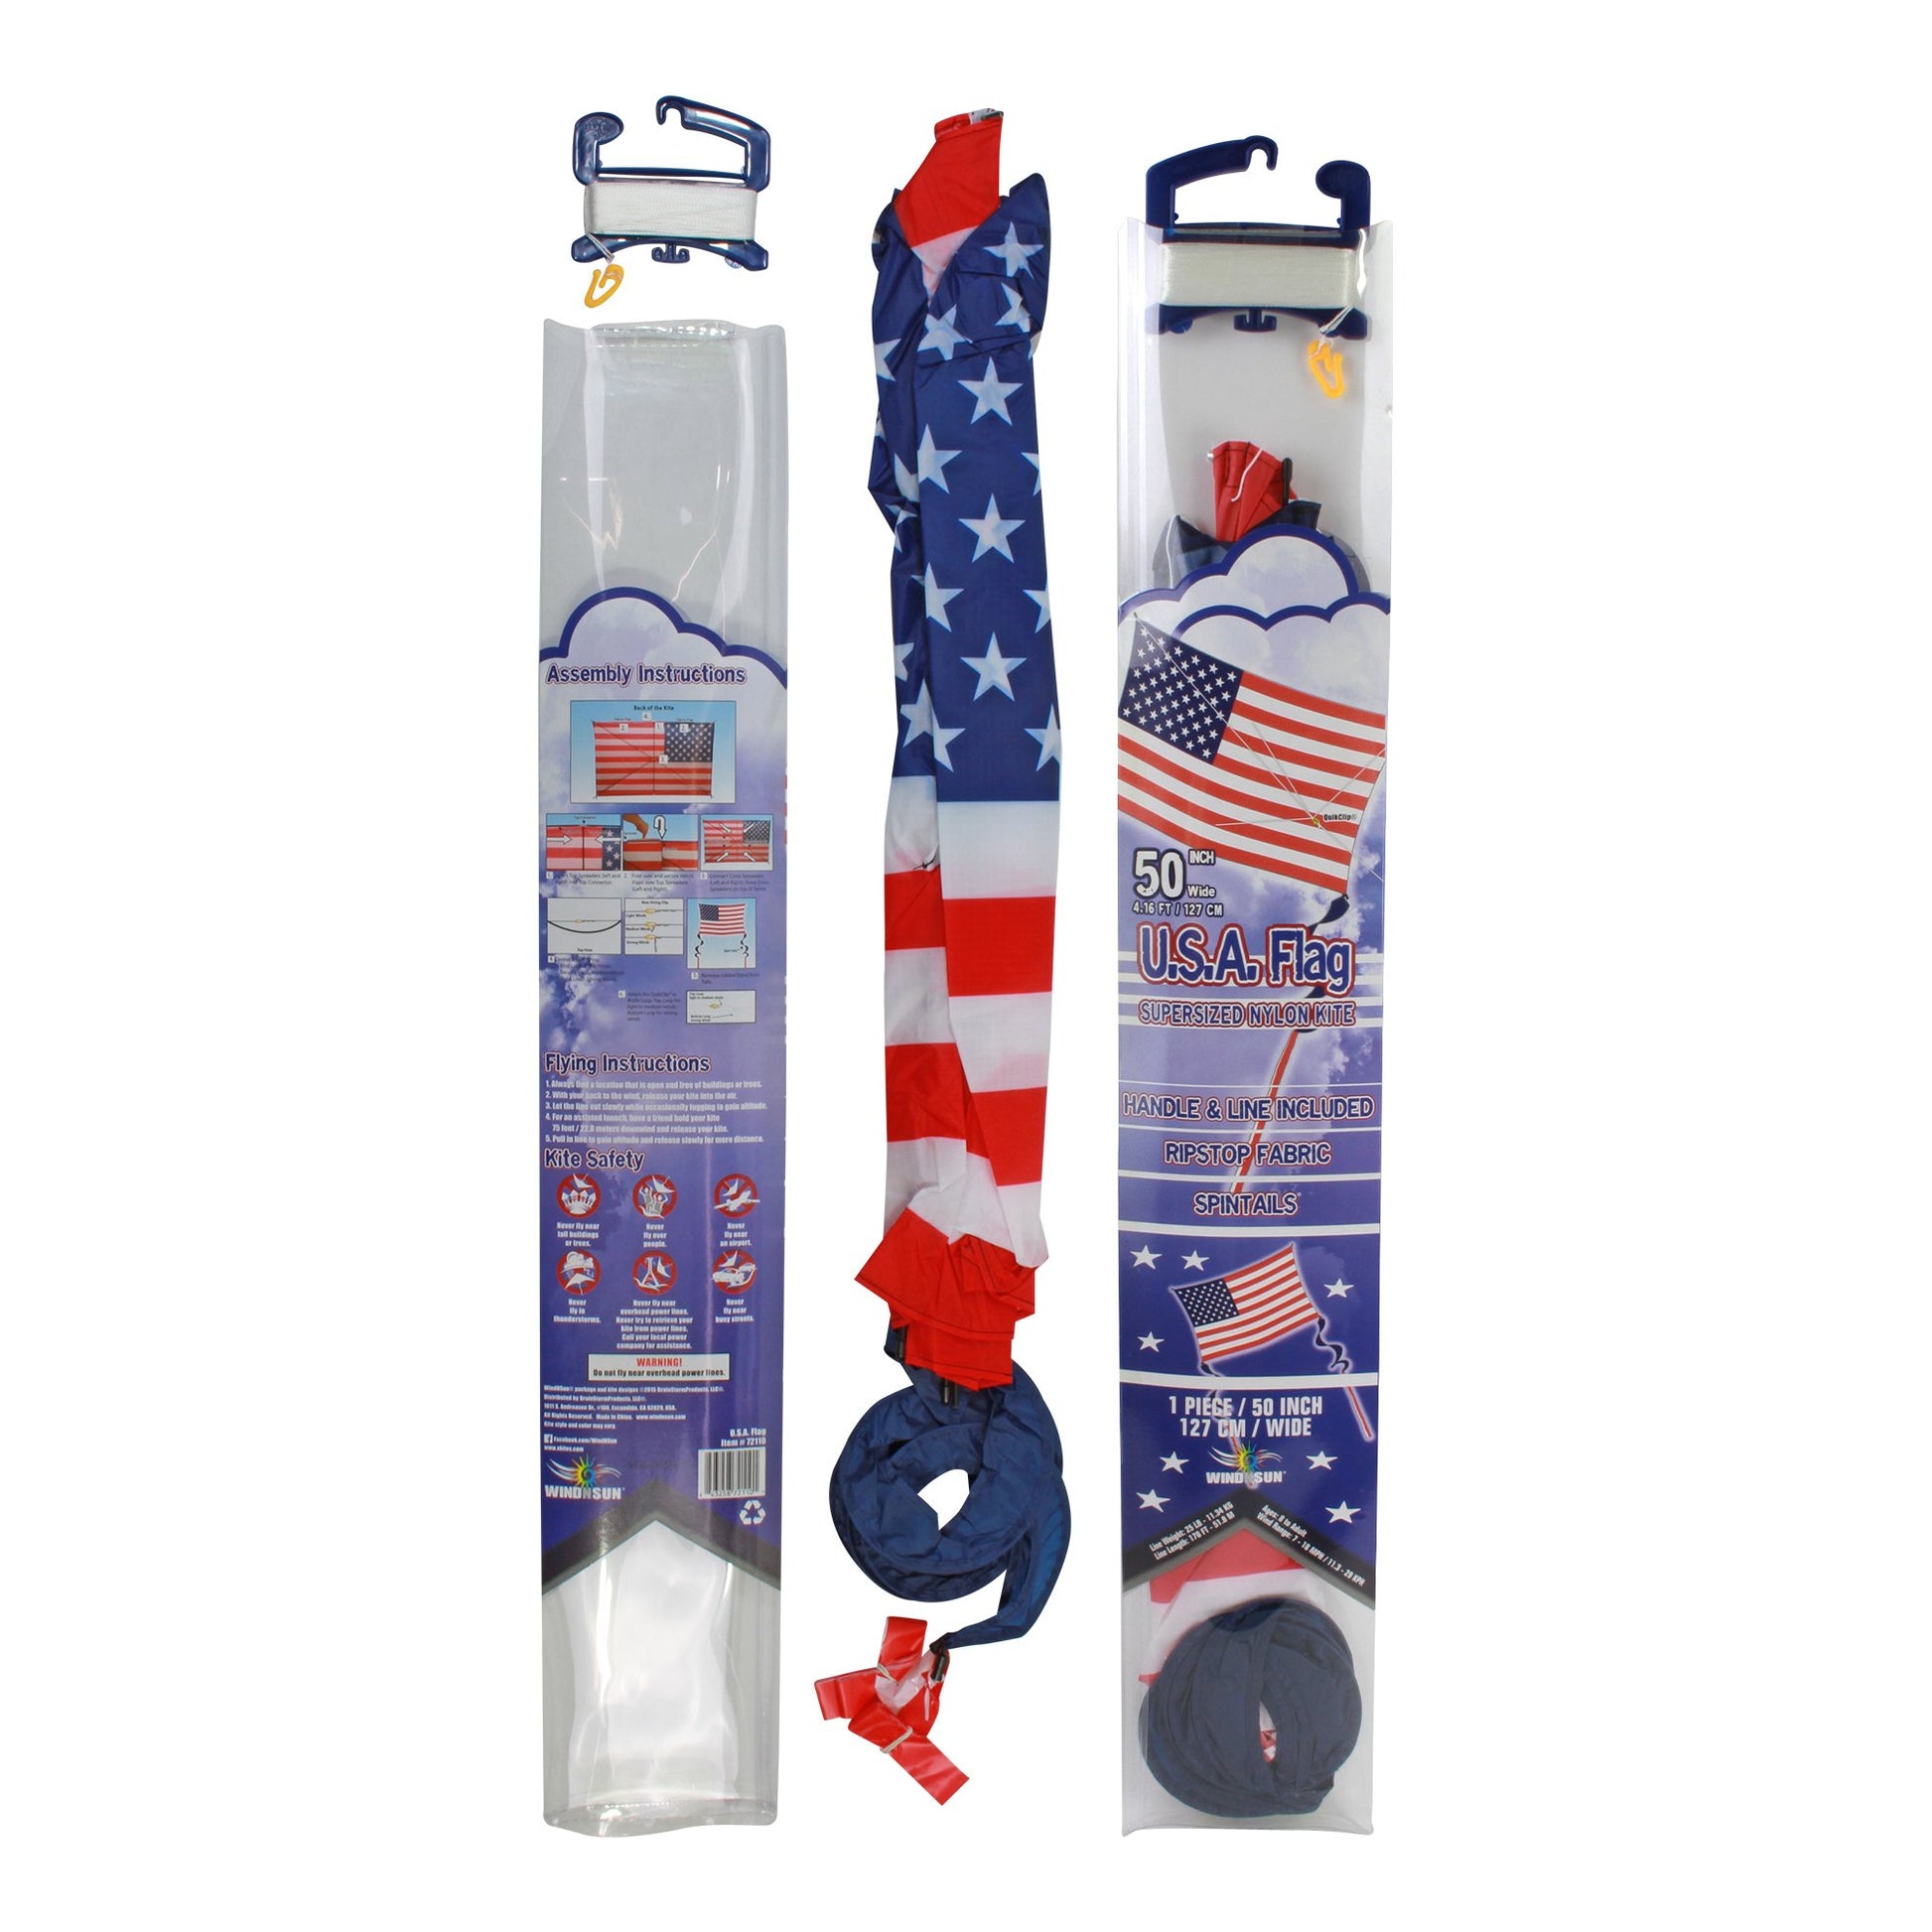 WindNSun Patriotic Eagle 70" and USA Flag 48" Nylon Kite Bundle packaging and contents